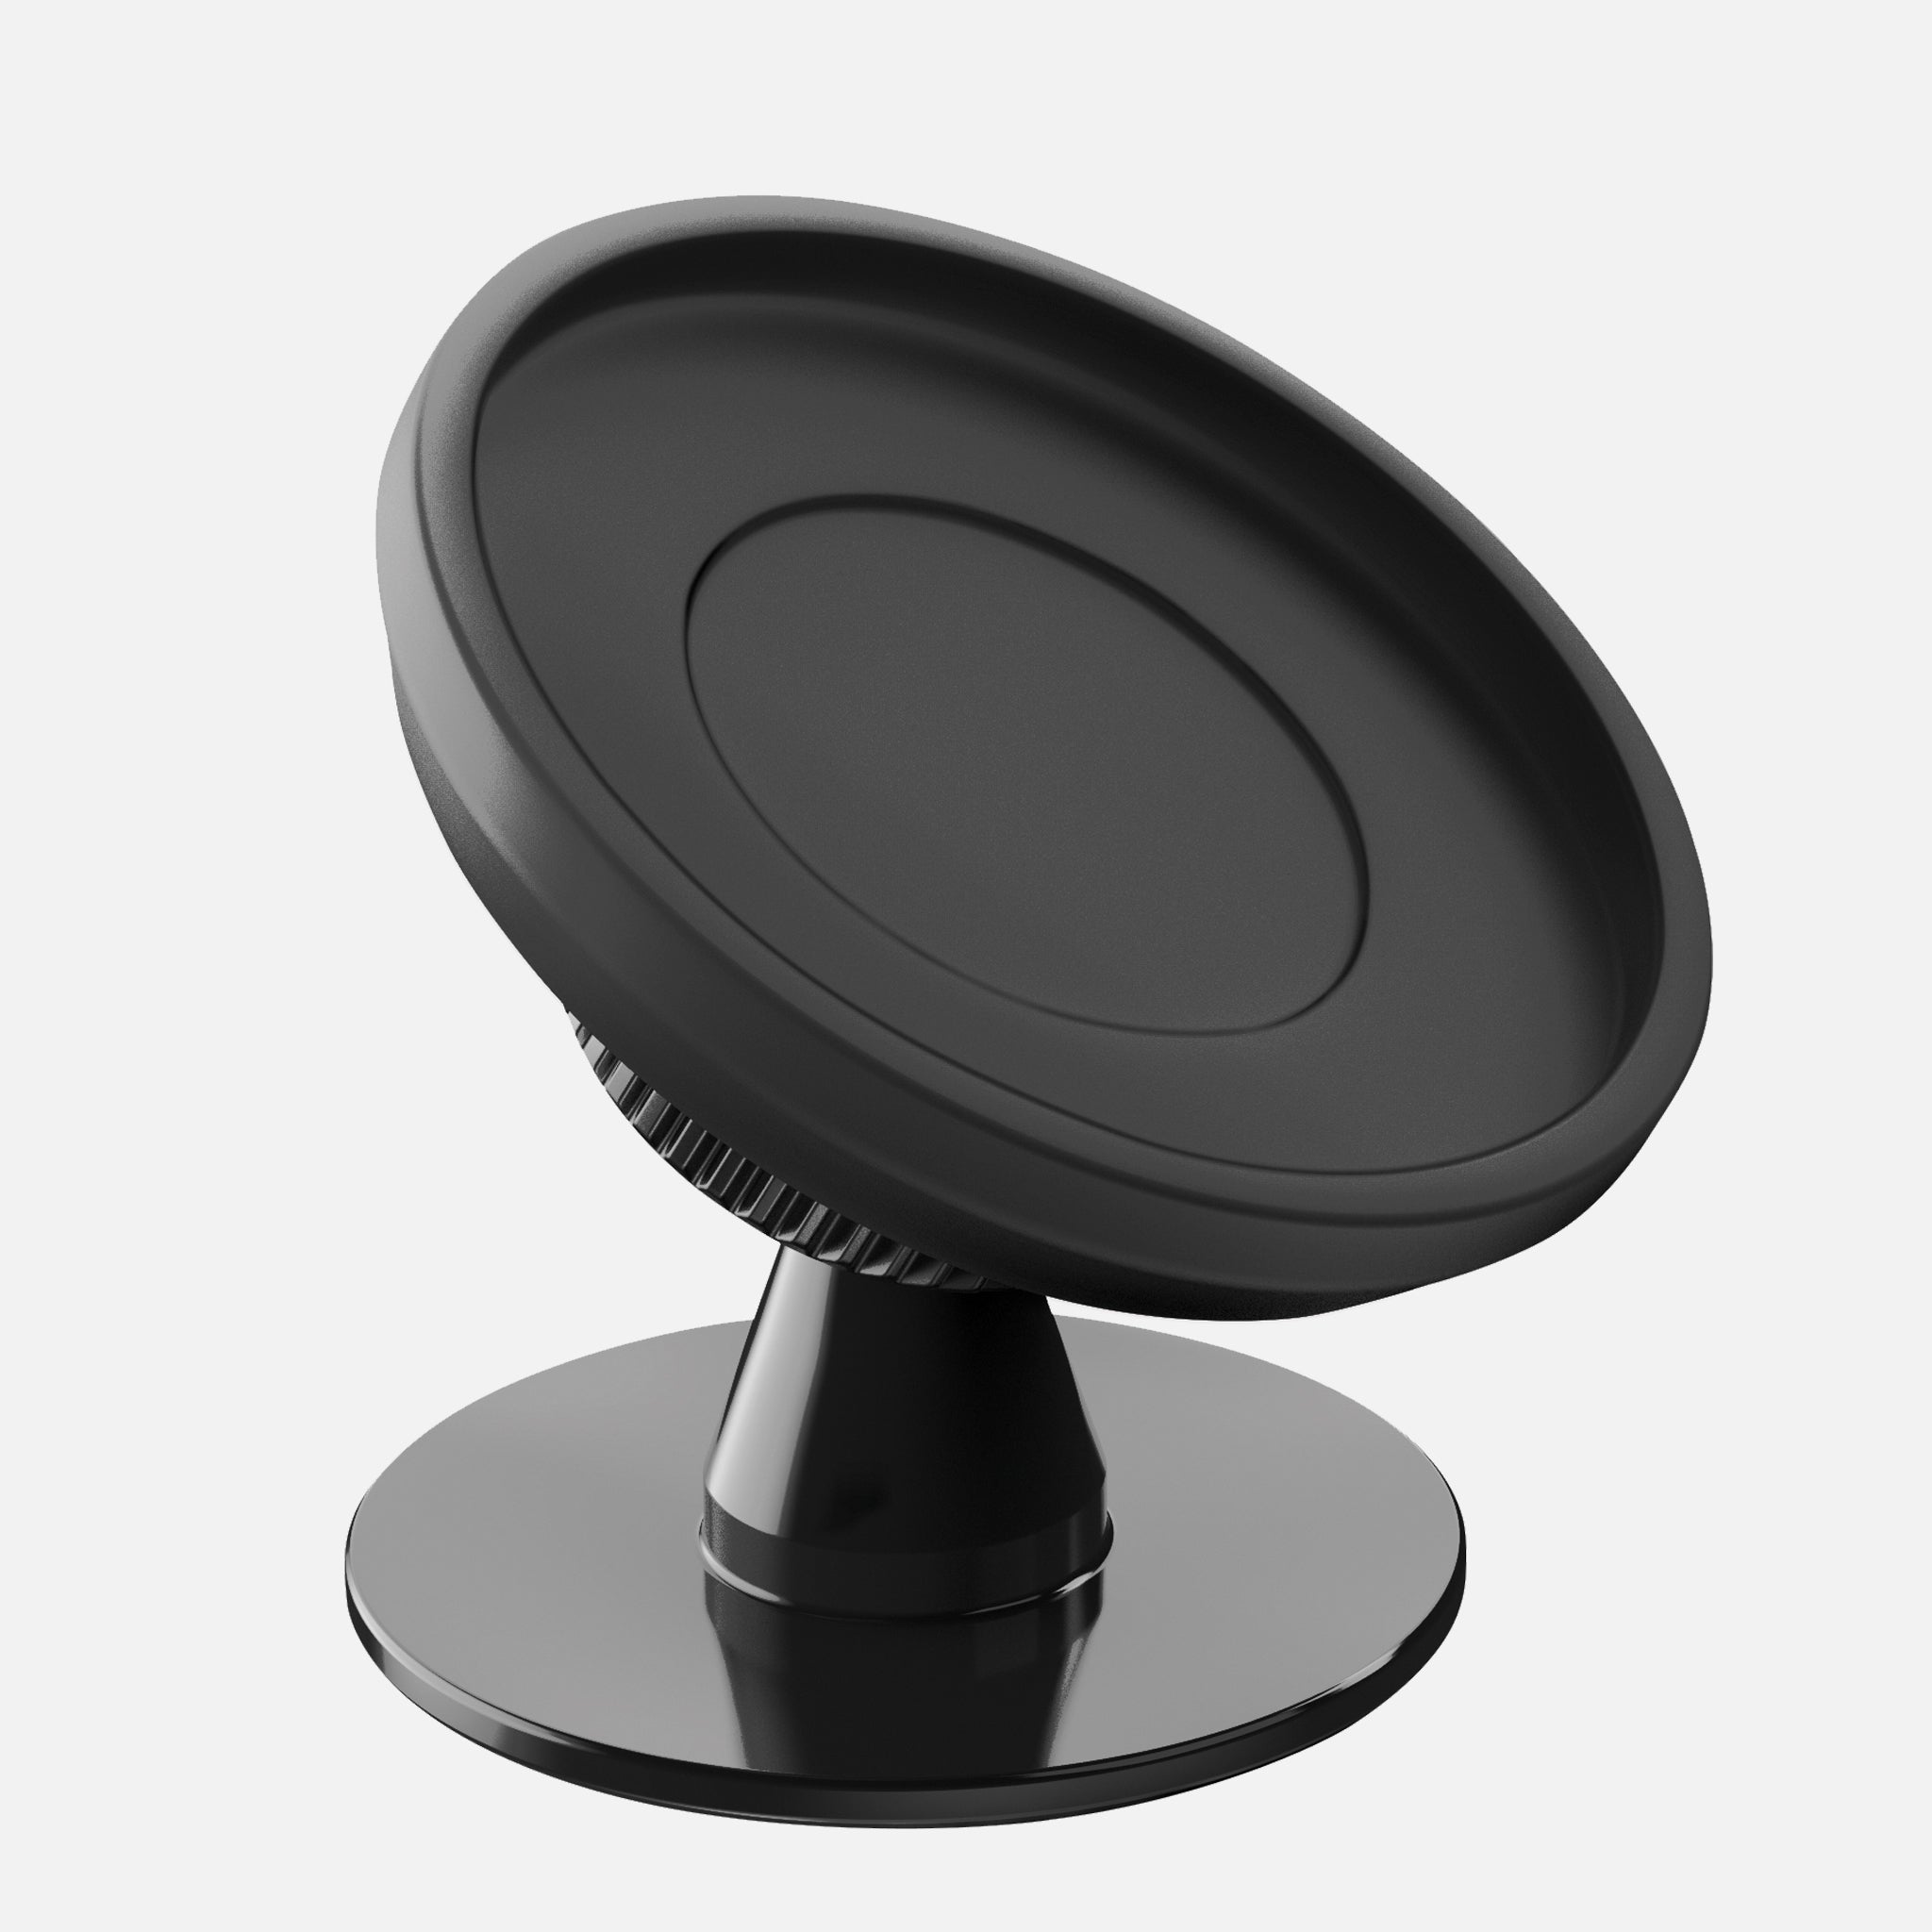 Highly Versatile Mount for MagSafe® Wireless Chargers